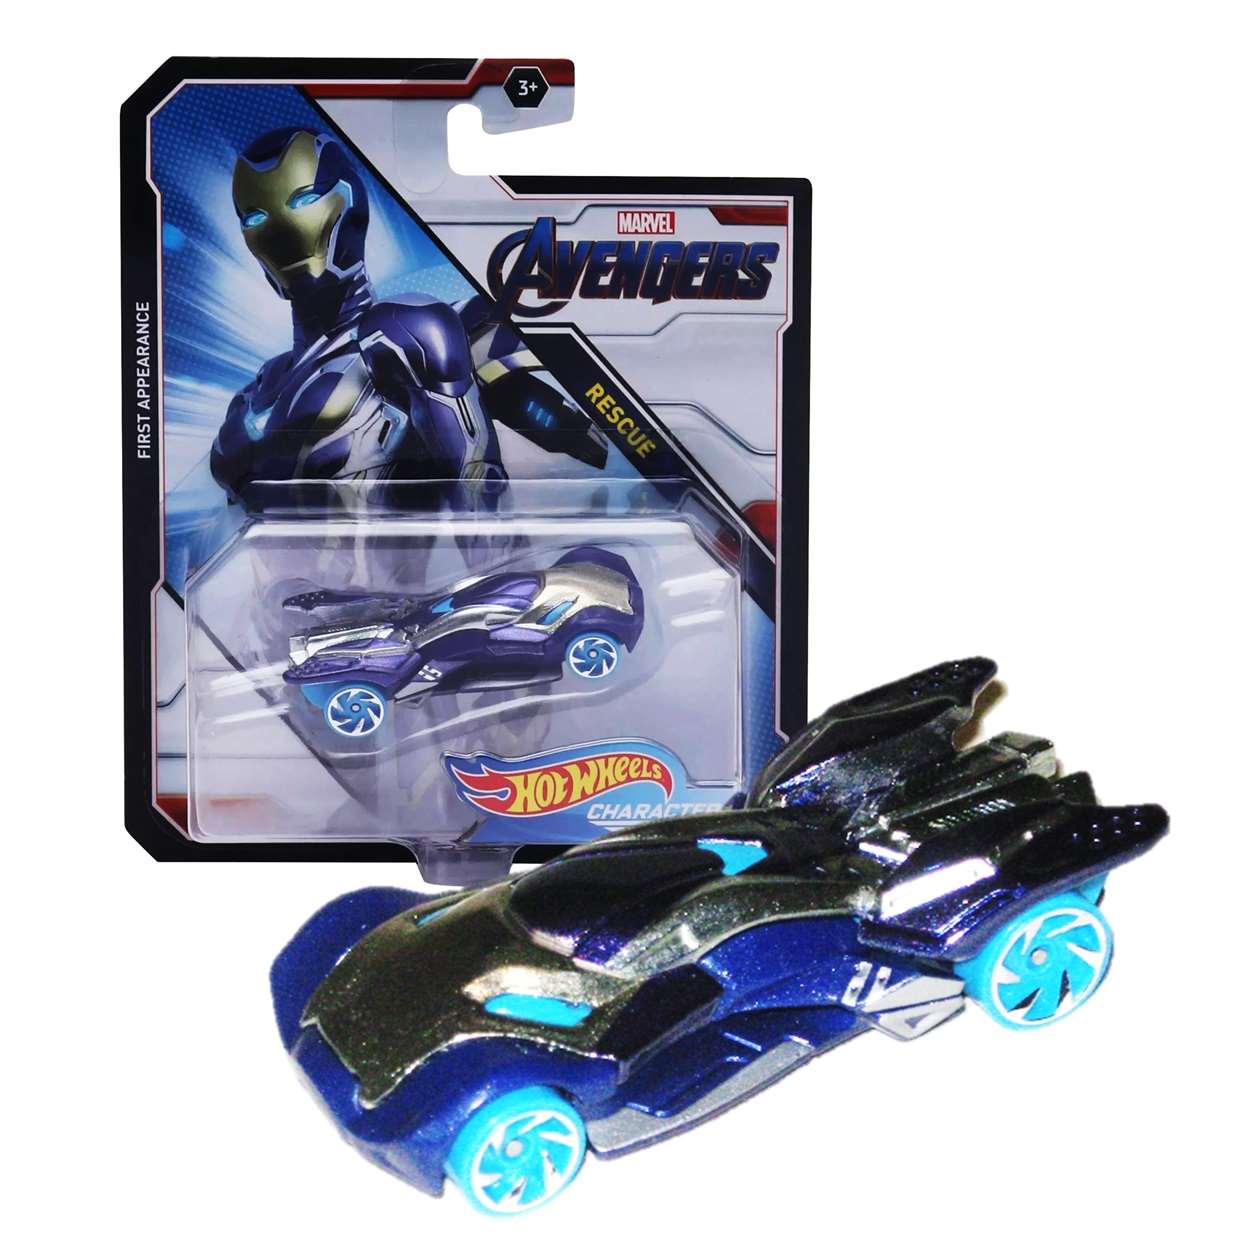 Rescue Hot Wheels End Games First Appearance Character Cars